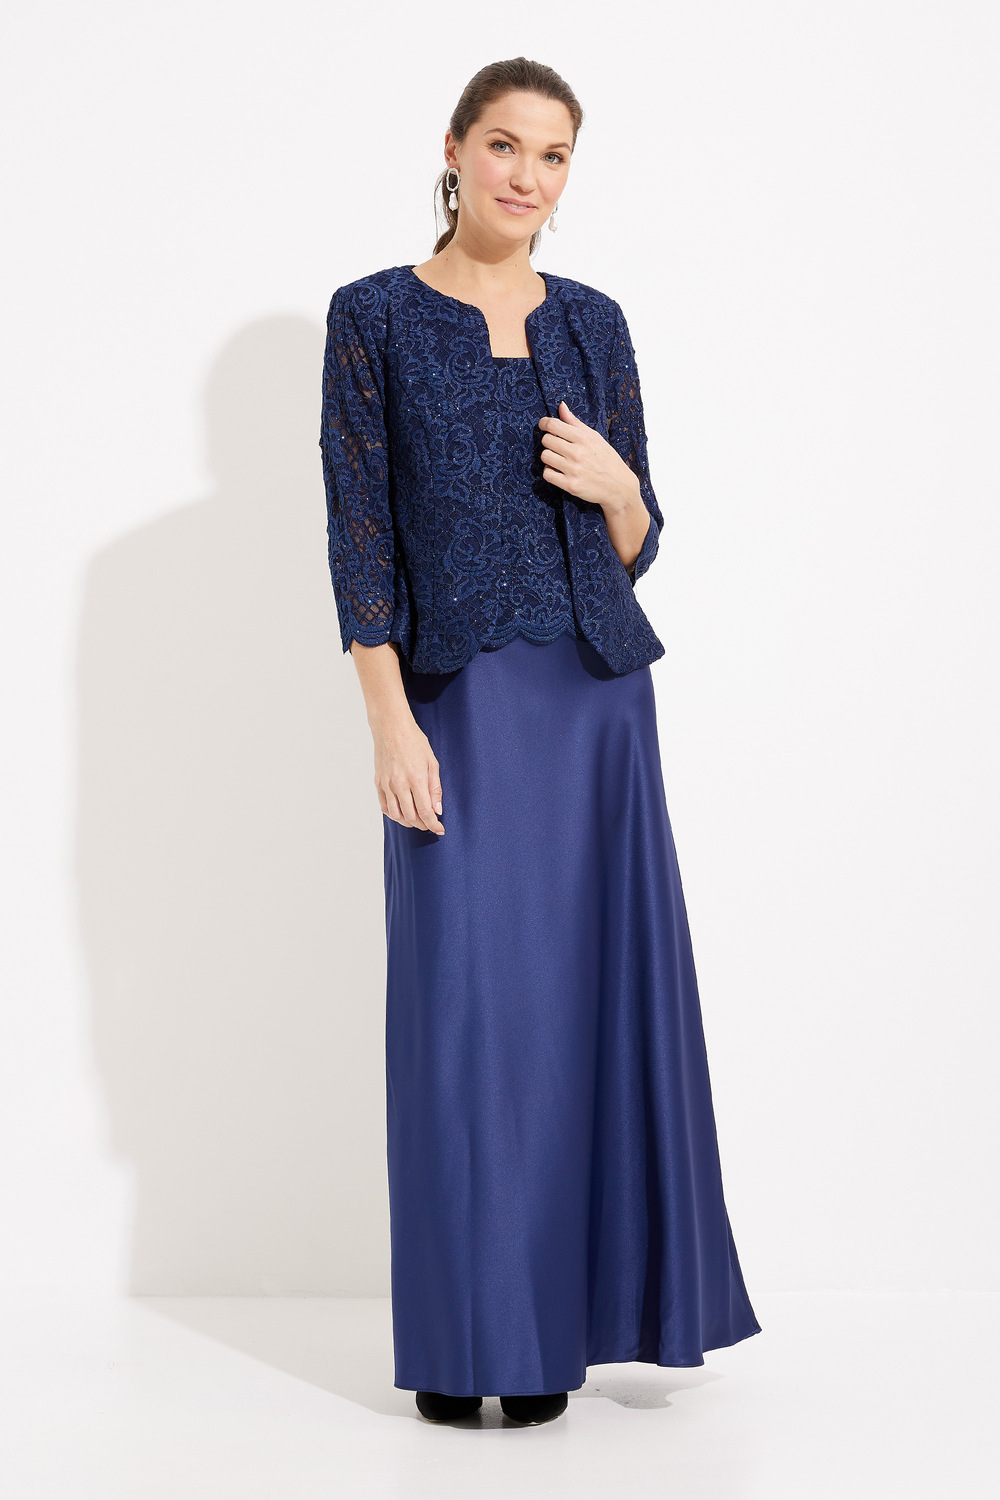 Lace Gown & Matching Jacket Style 81122326. Navy